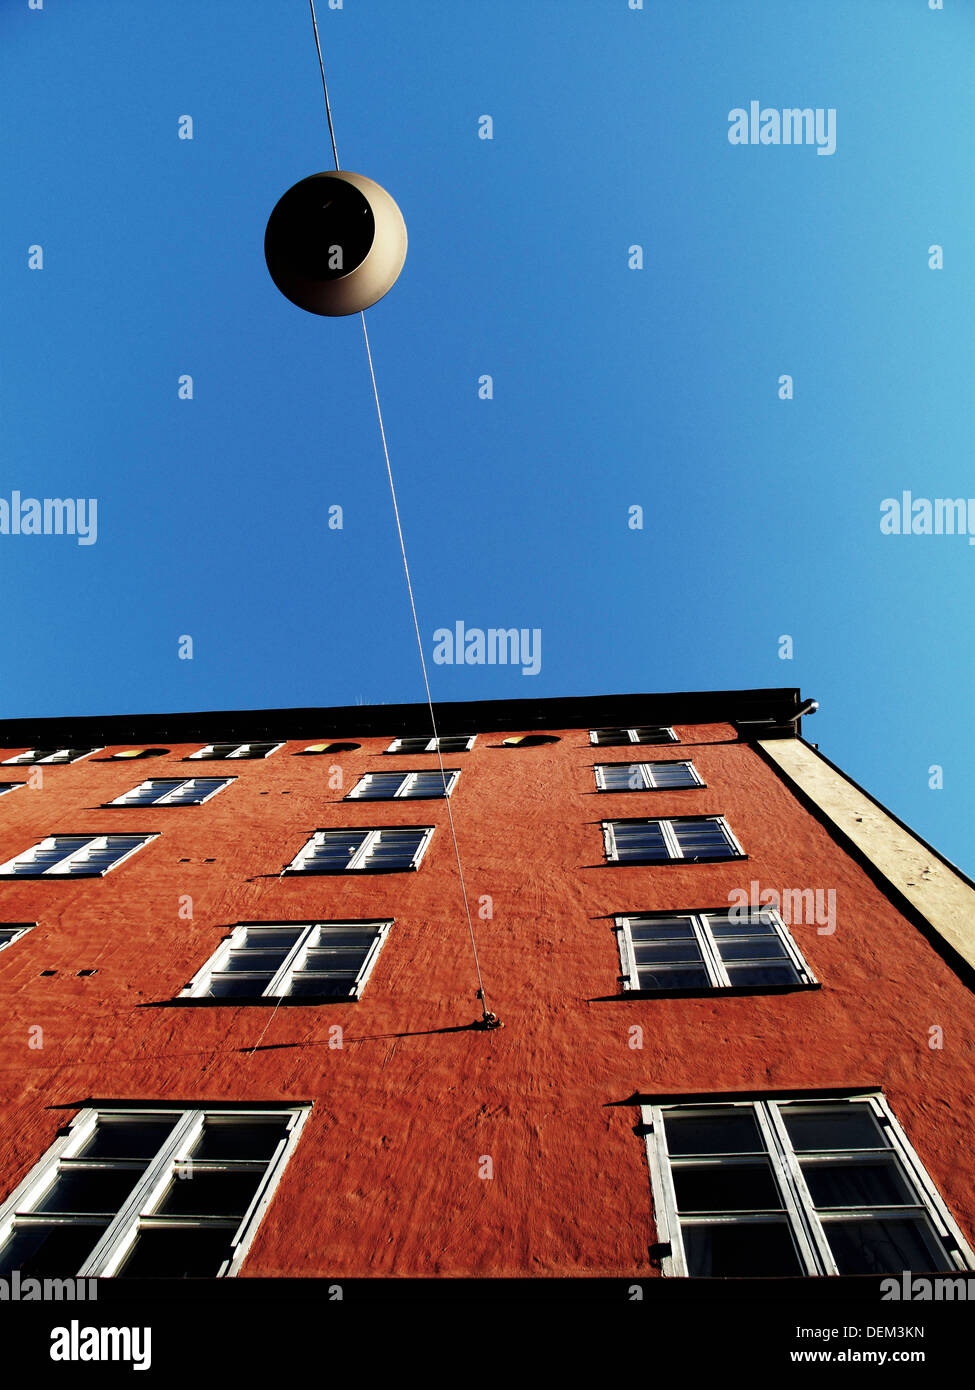 Streetlamp Hanging From Building, Low Angle View Stock Photo